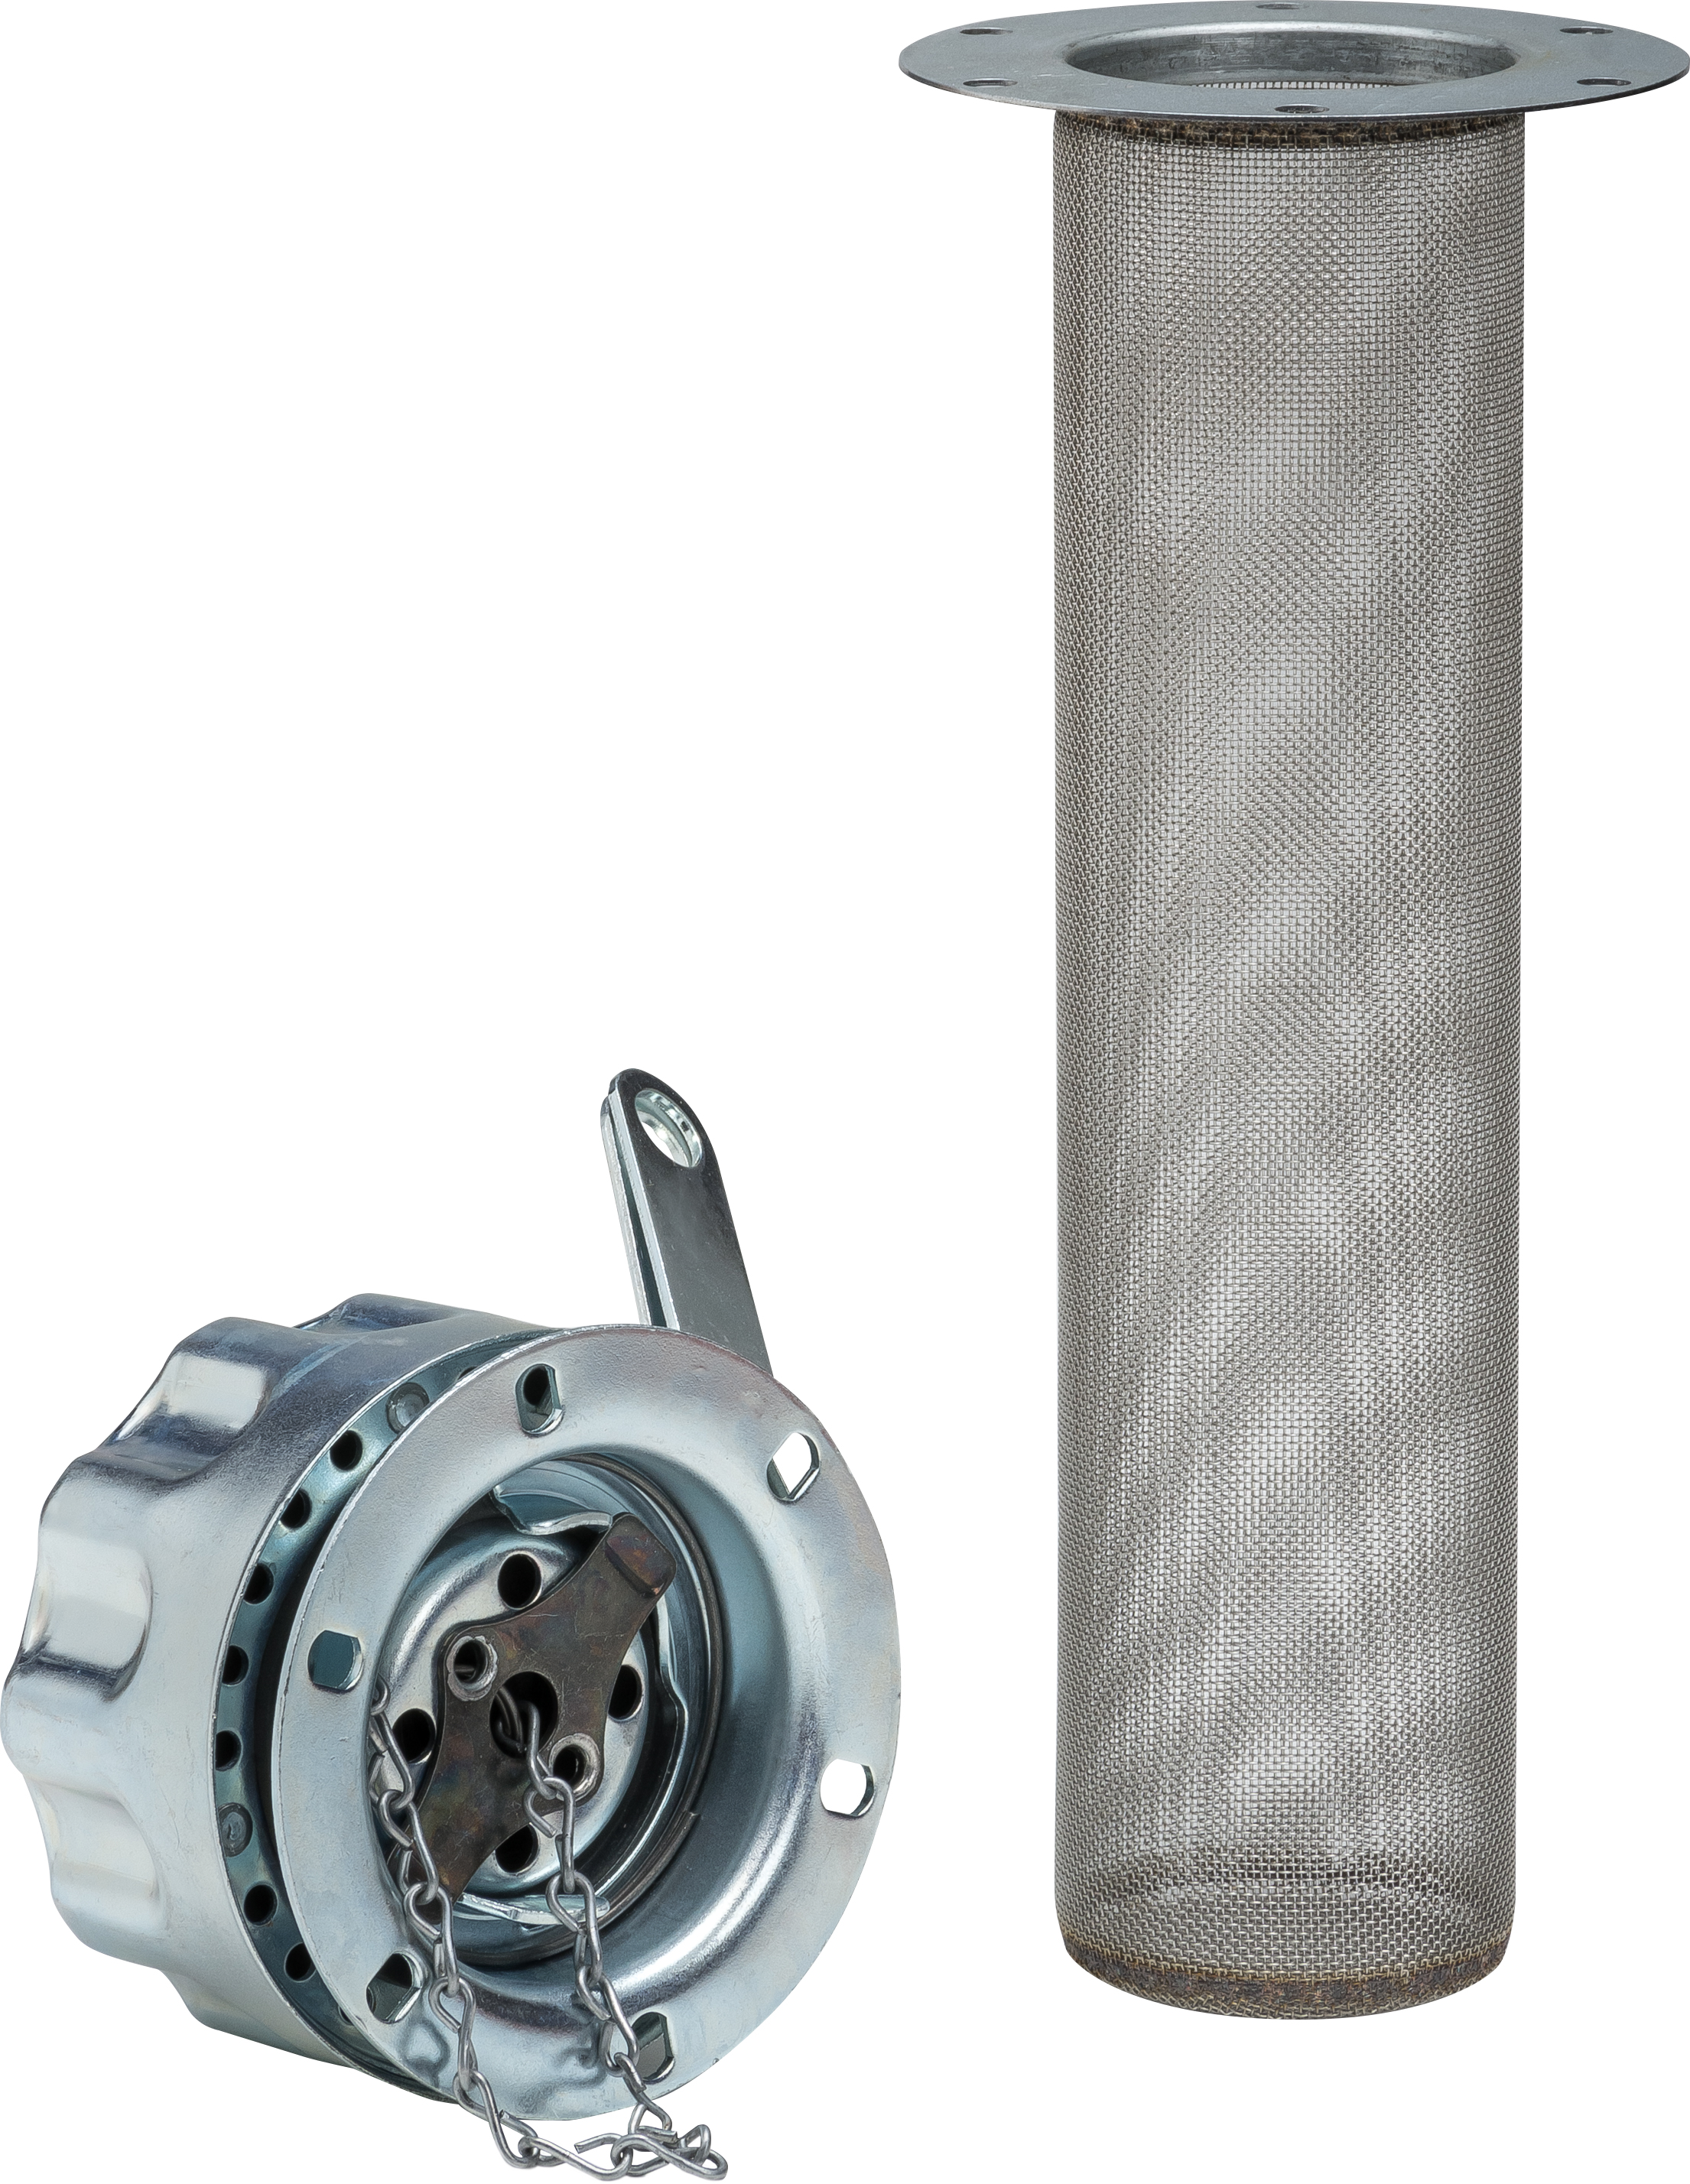 The bayonet style has air flow to 30 CFM, self-tapping screws for flange mounts and cork gaskets as standard.